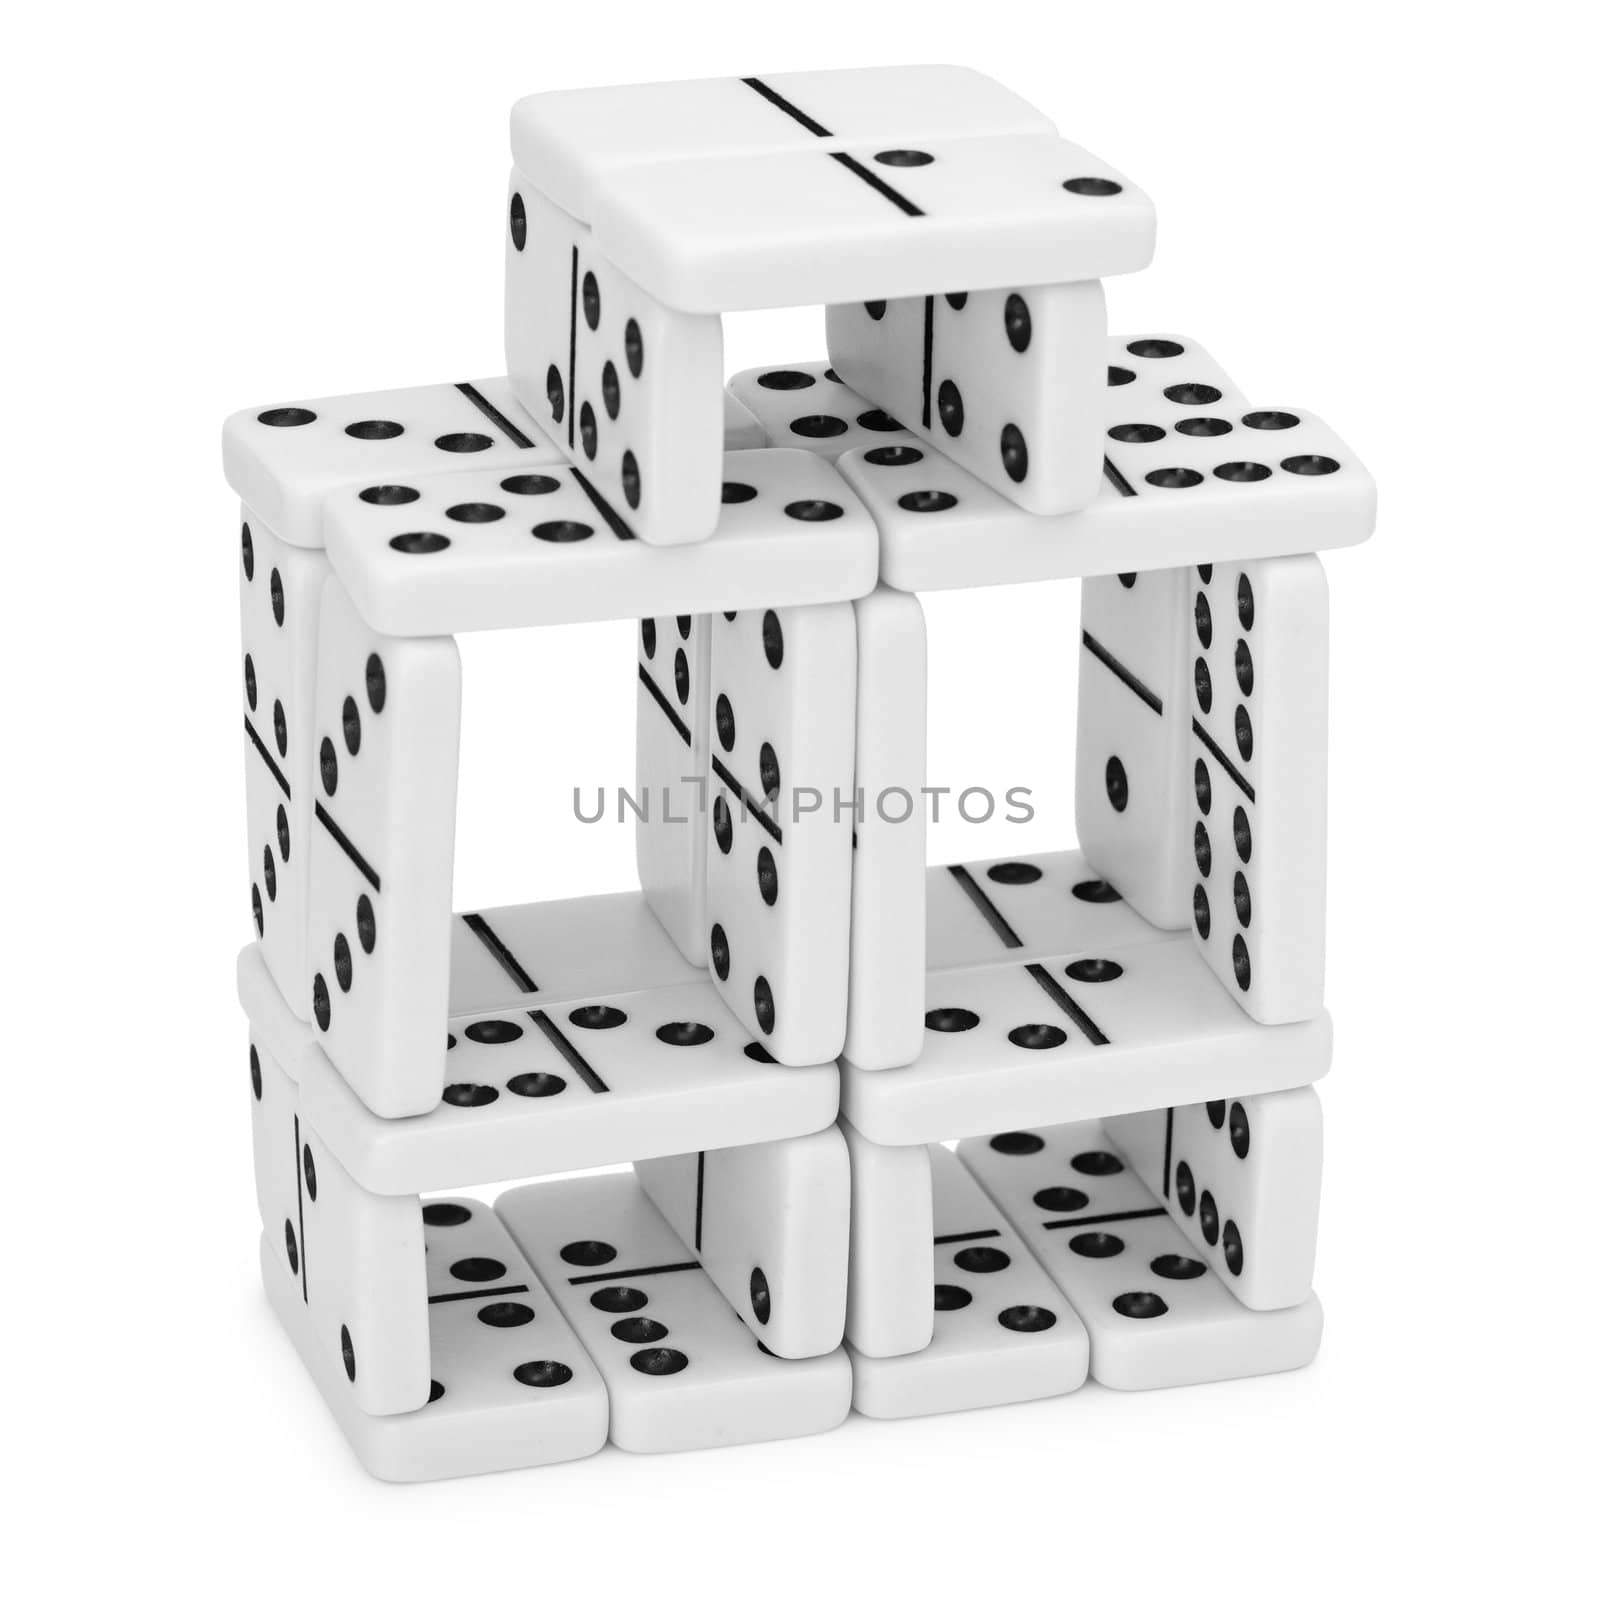 Intricate construction of dominoes on a white background